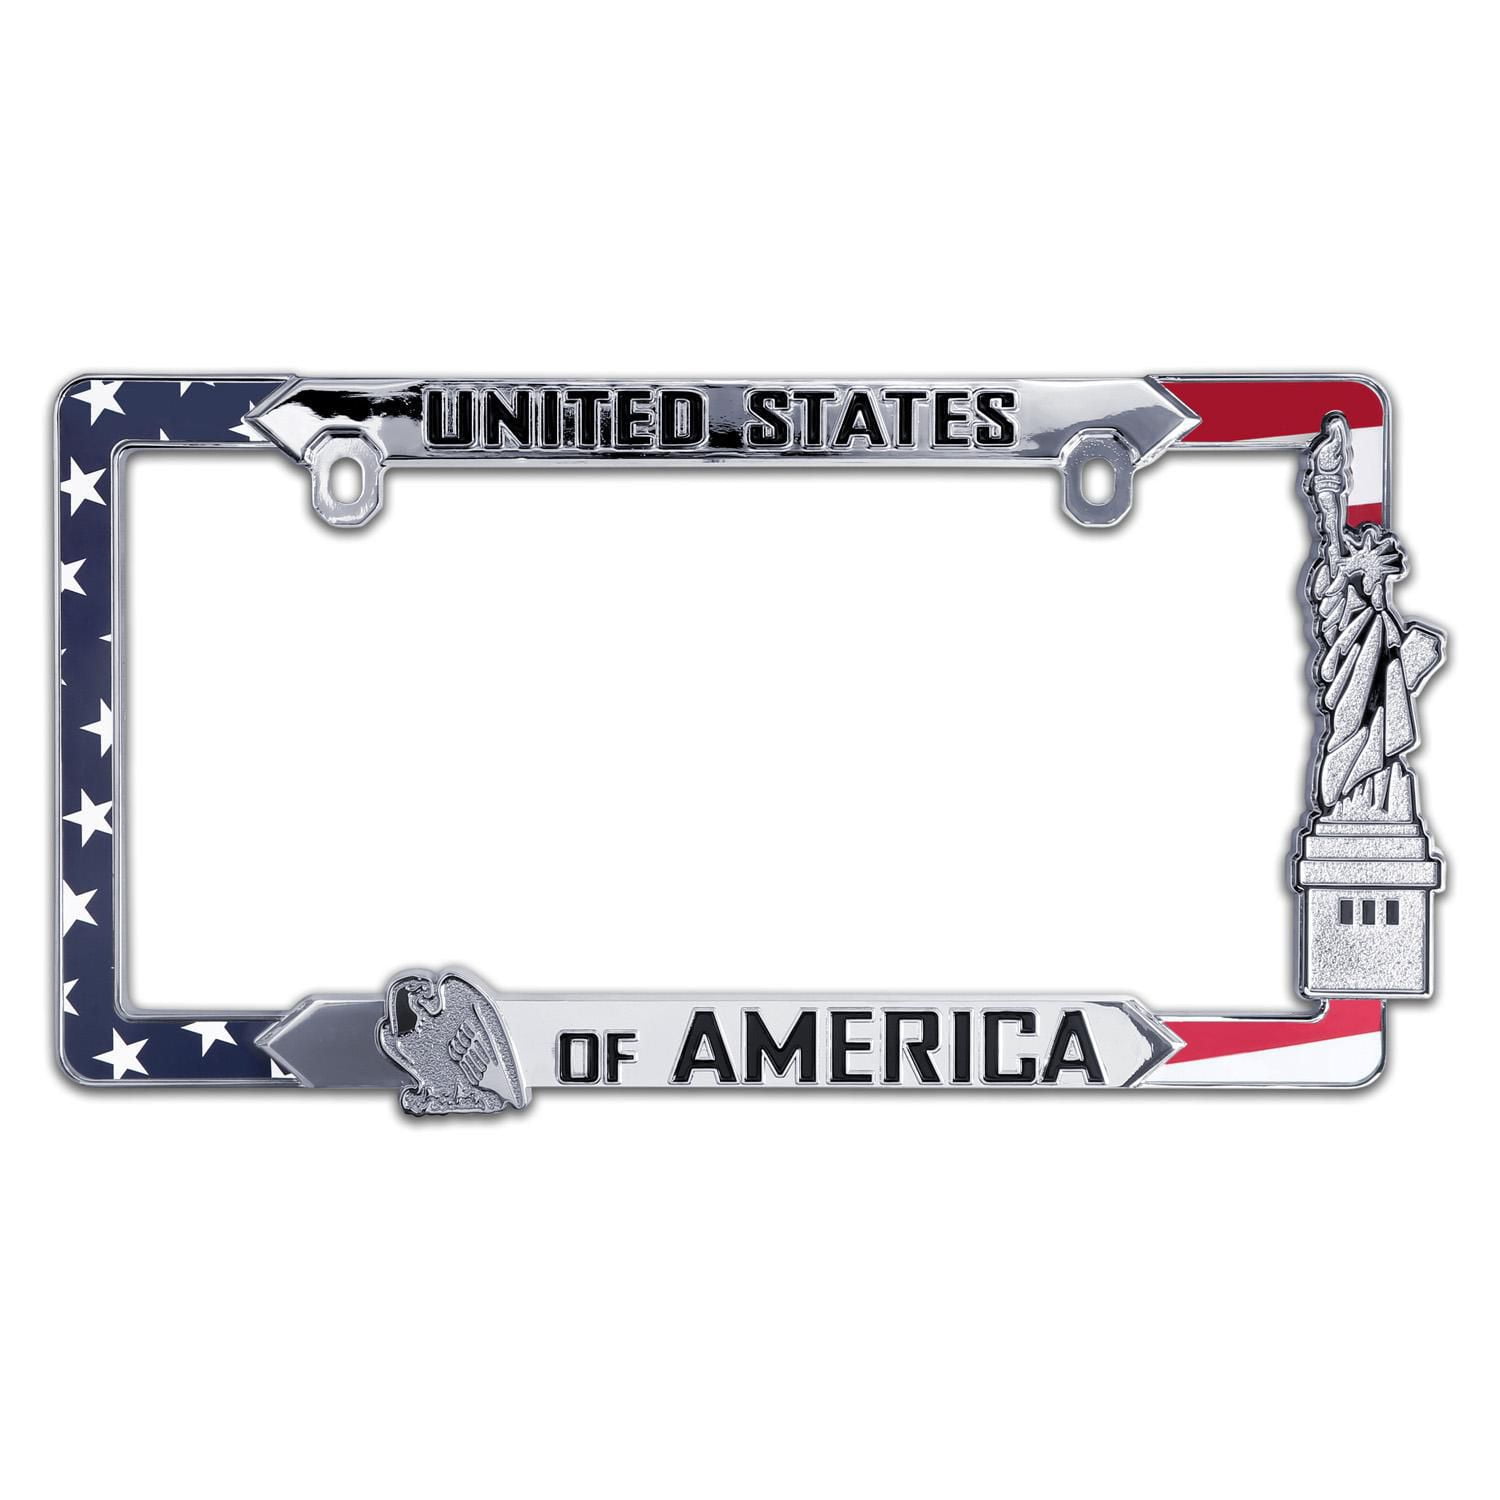 Matte Black License Plate Frames - Airxwills License Plate Covers, 2 Packs Universal Aluminum Tag Frame for Front and Rear Car Tags.